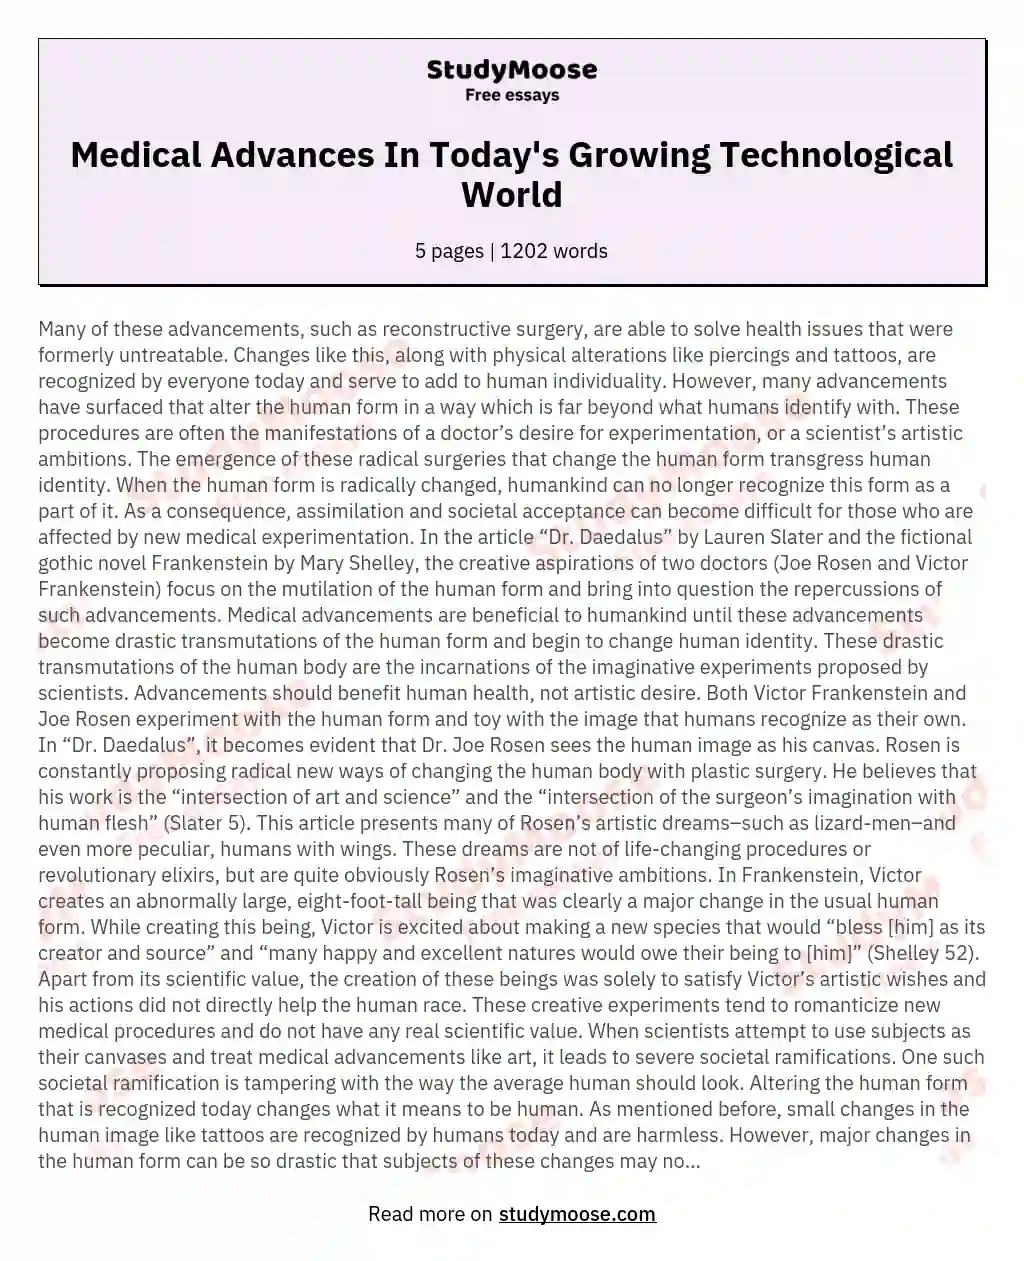 Medical Advances In Today's Growing Technological World essay